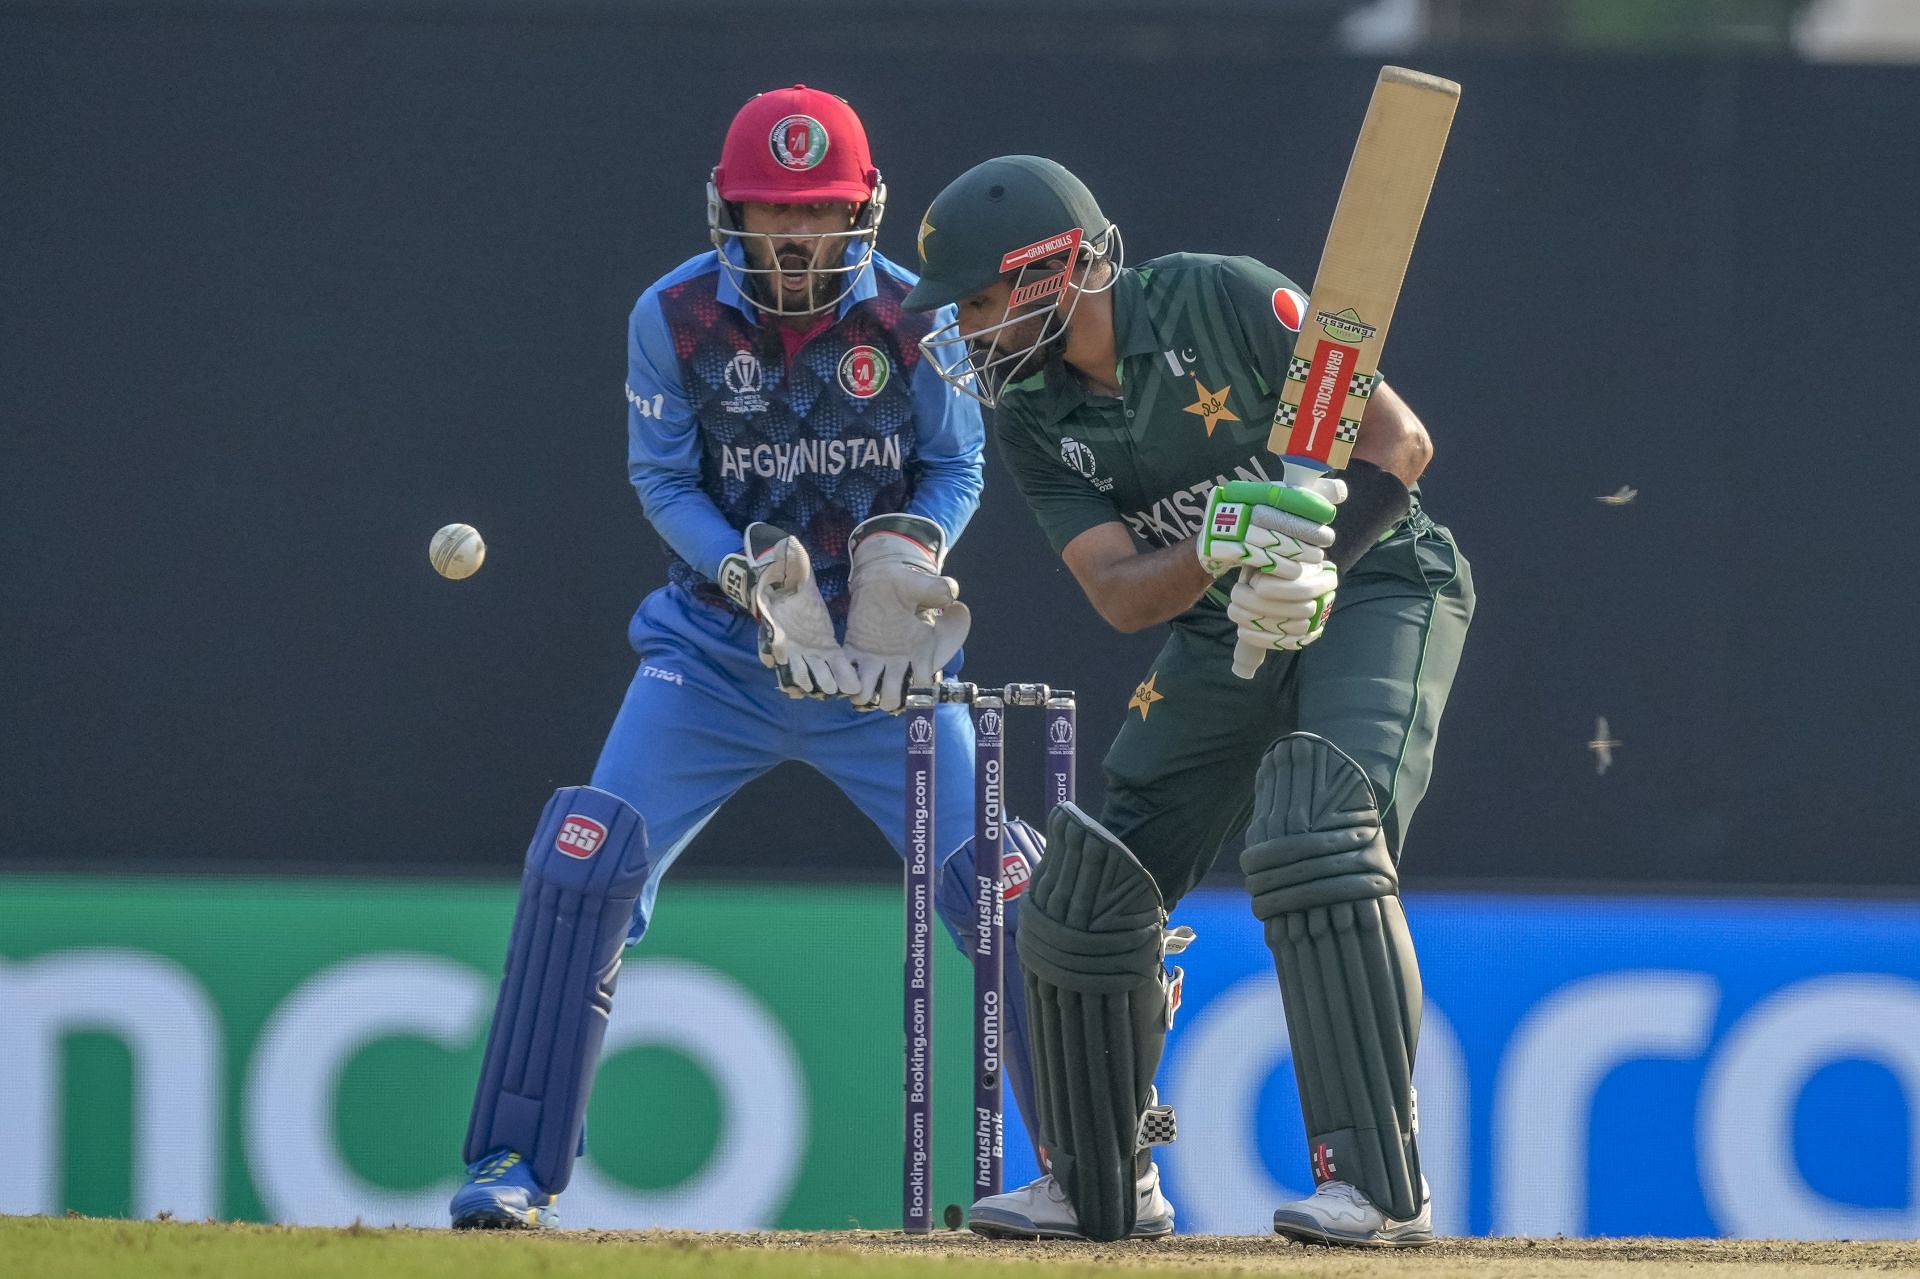 Babar Azam and the other Pakistan top-order batters like to build their innings. [P/C: AP]